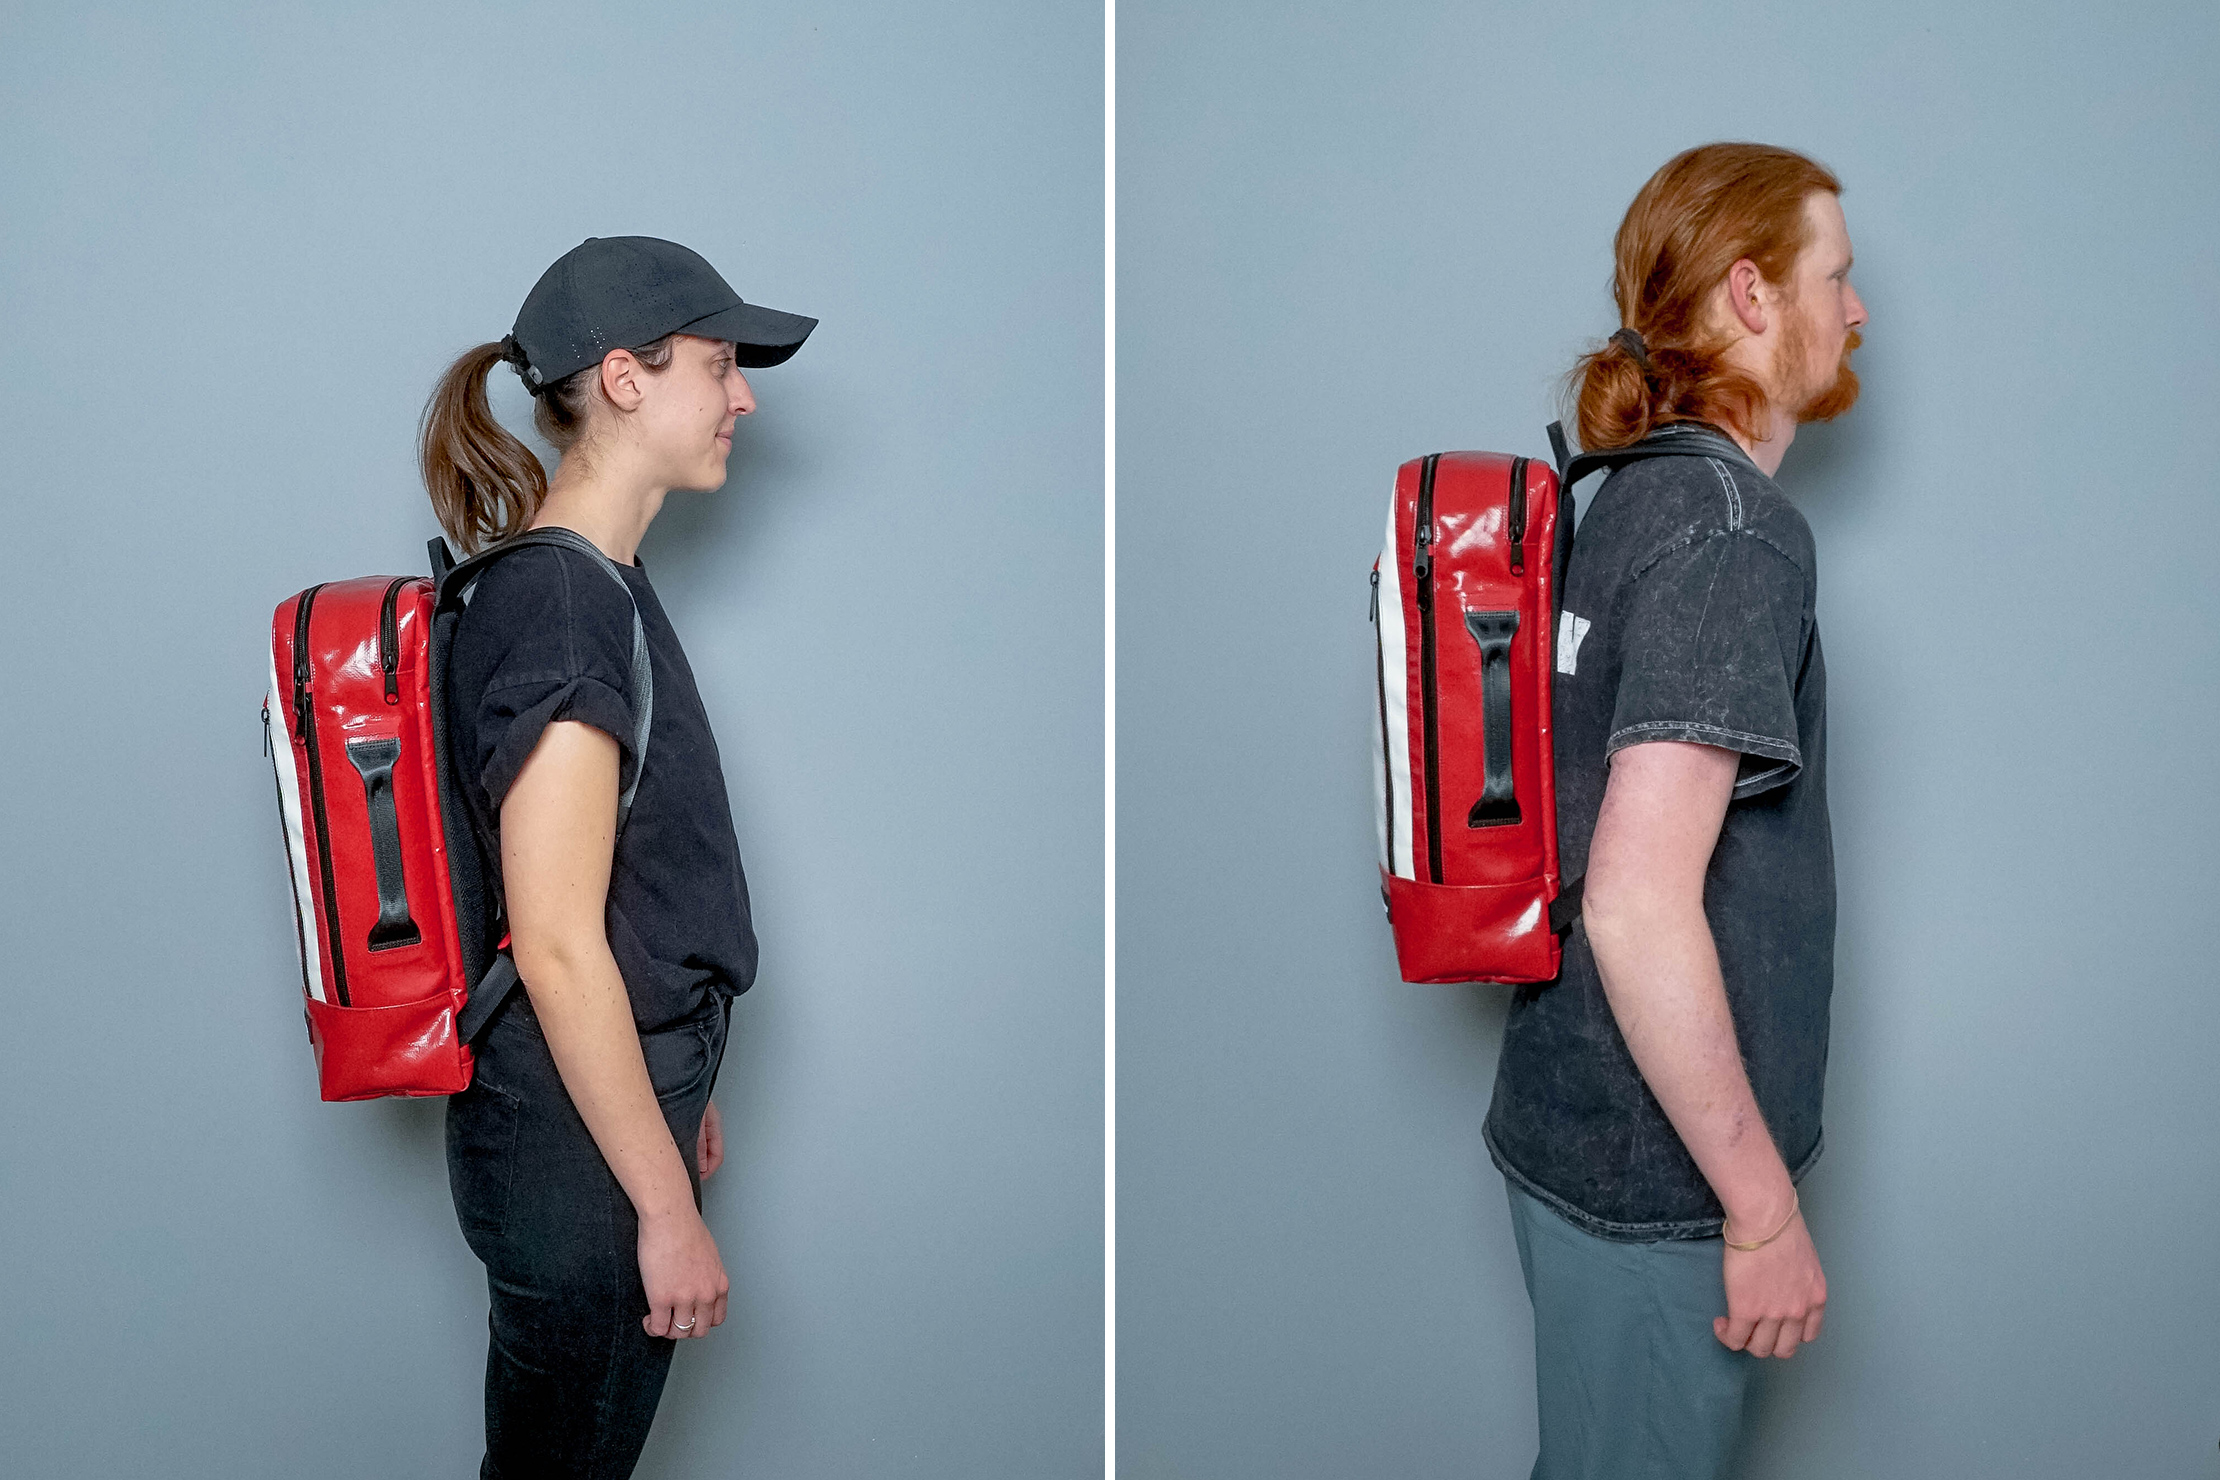 Freitag F306 HAZZARD Backpack Review | Pack Hacker